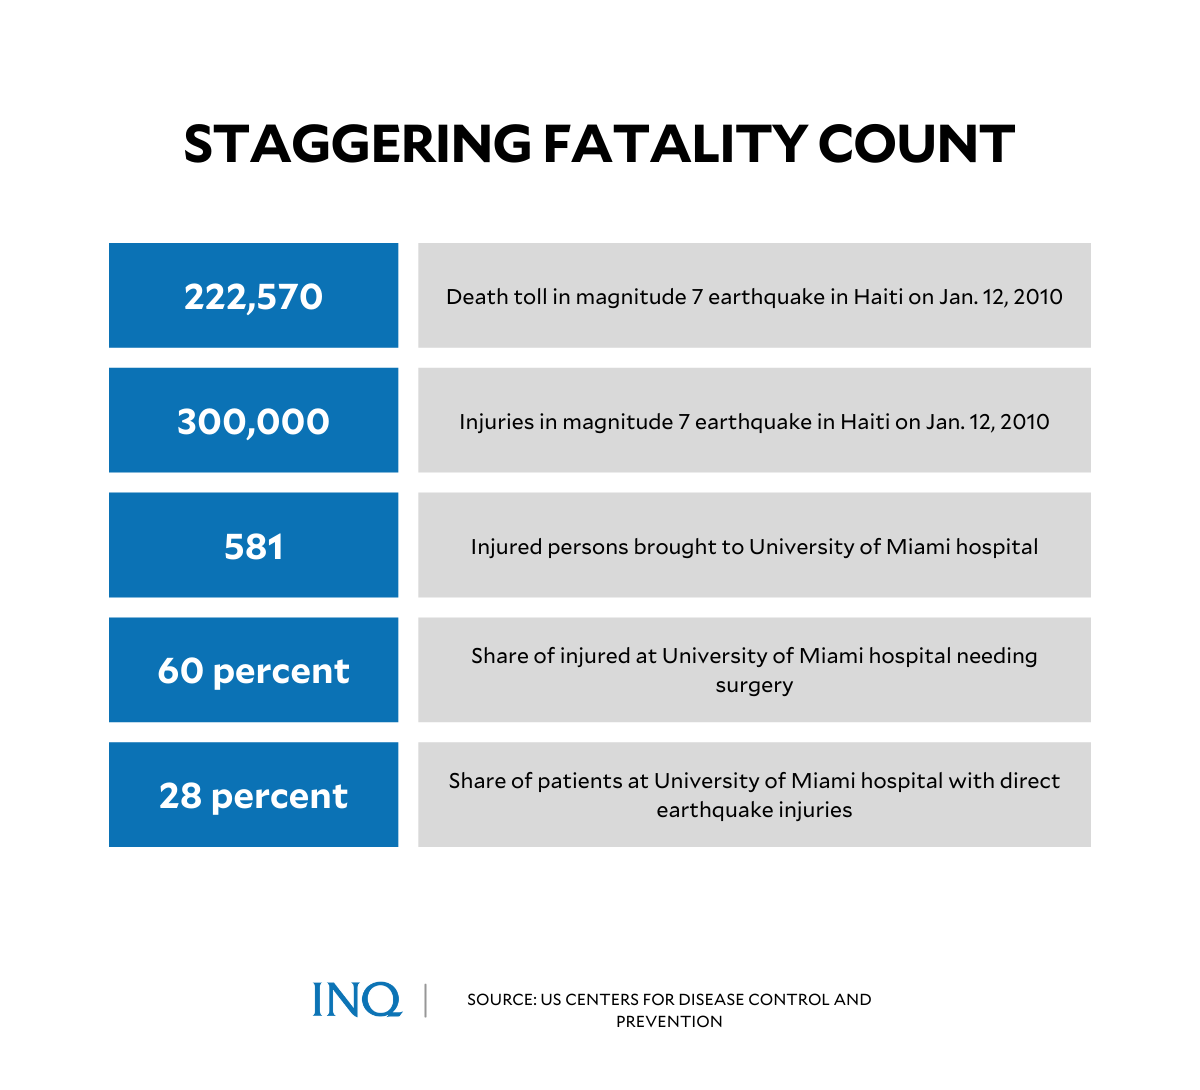 Staggering fatality count